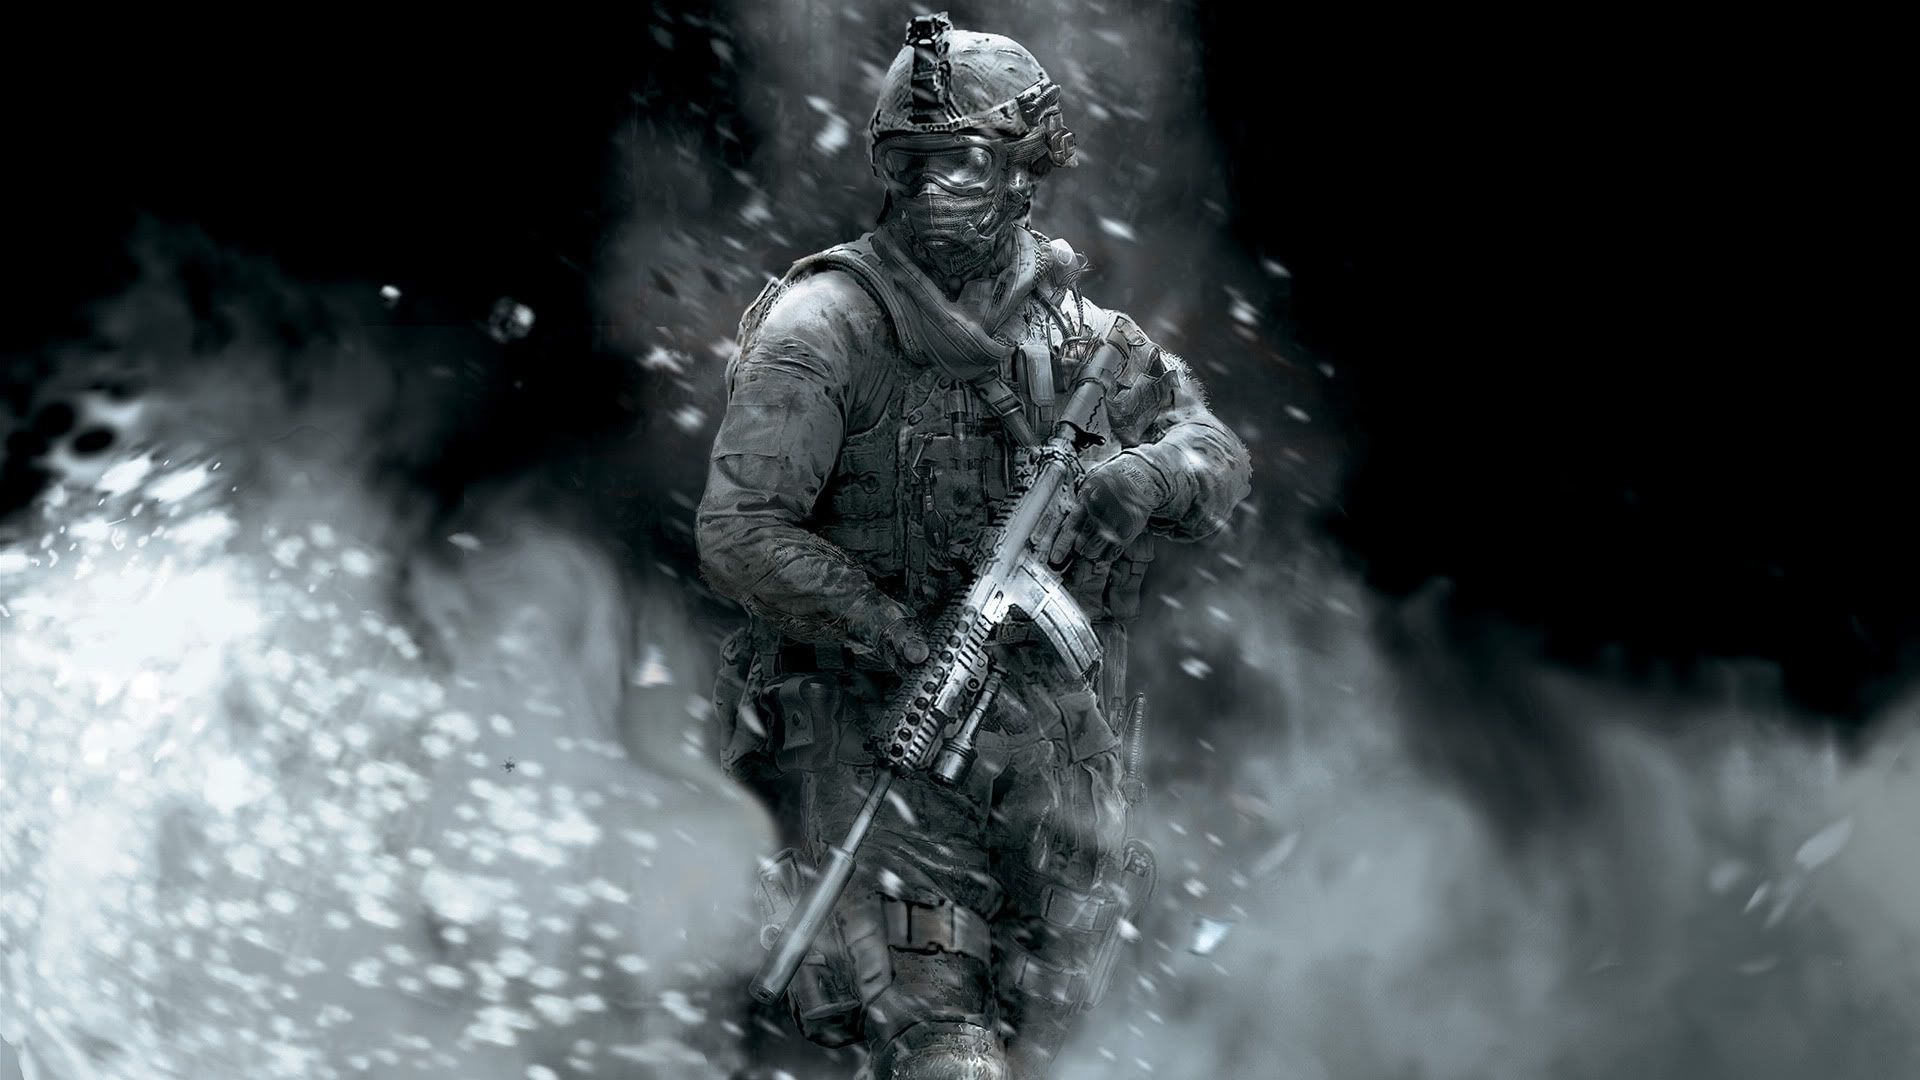 Another Two Modern Warfare 2 Wallpapers (1080P). Posted Oct 21, 2009 4:50 am